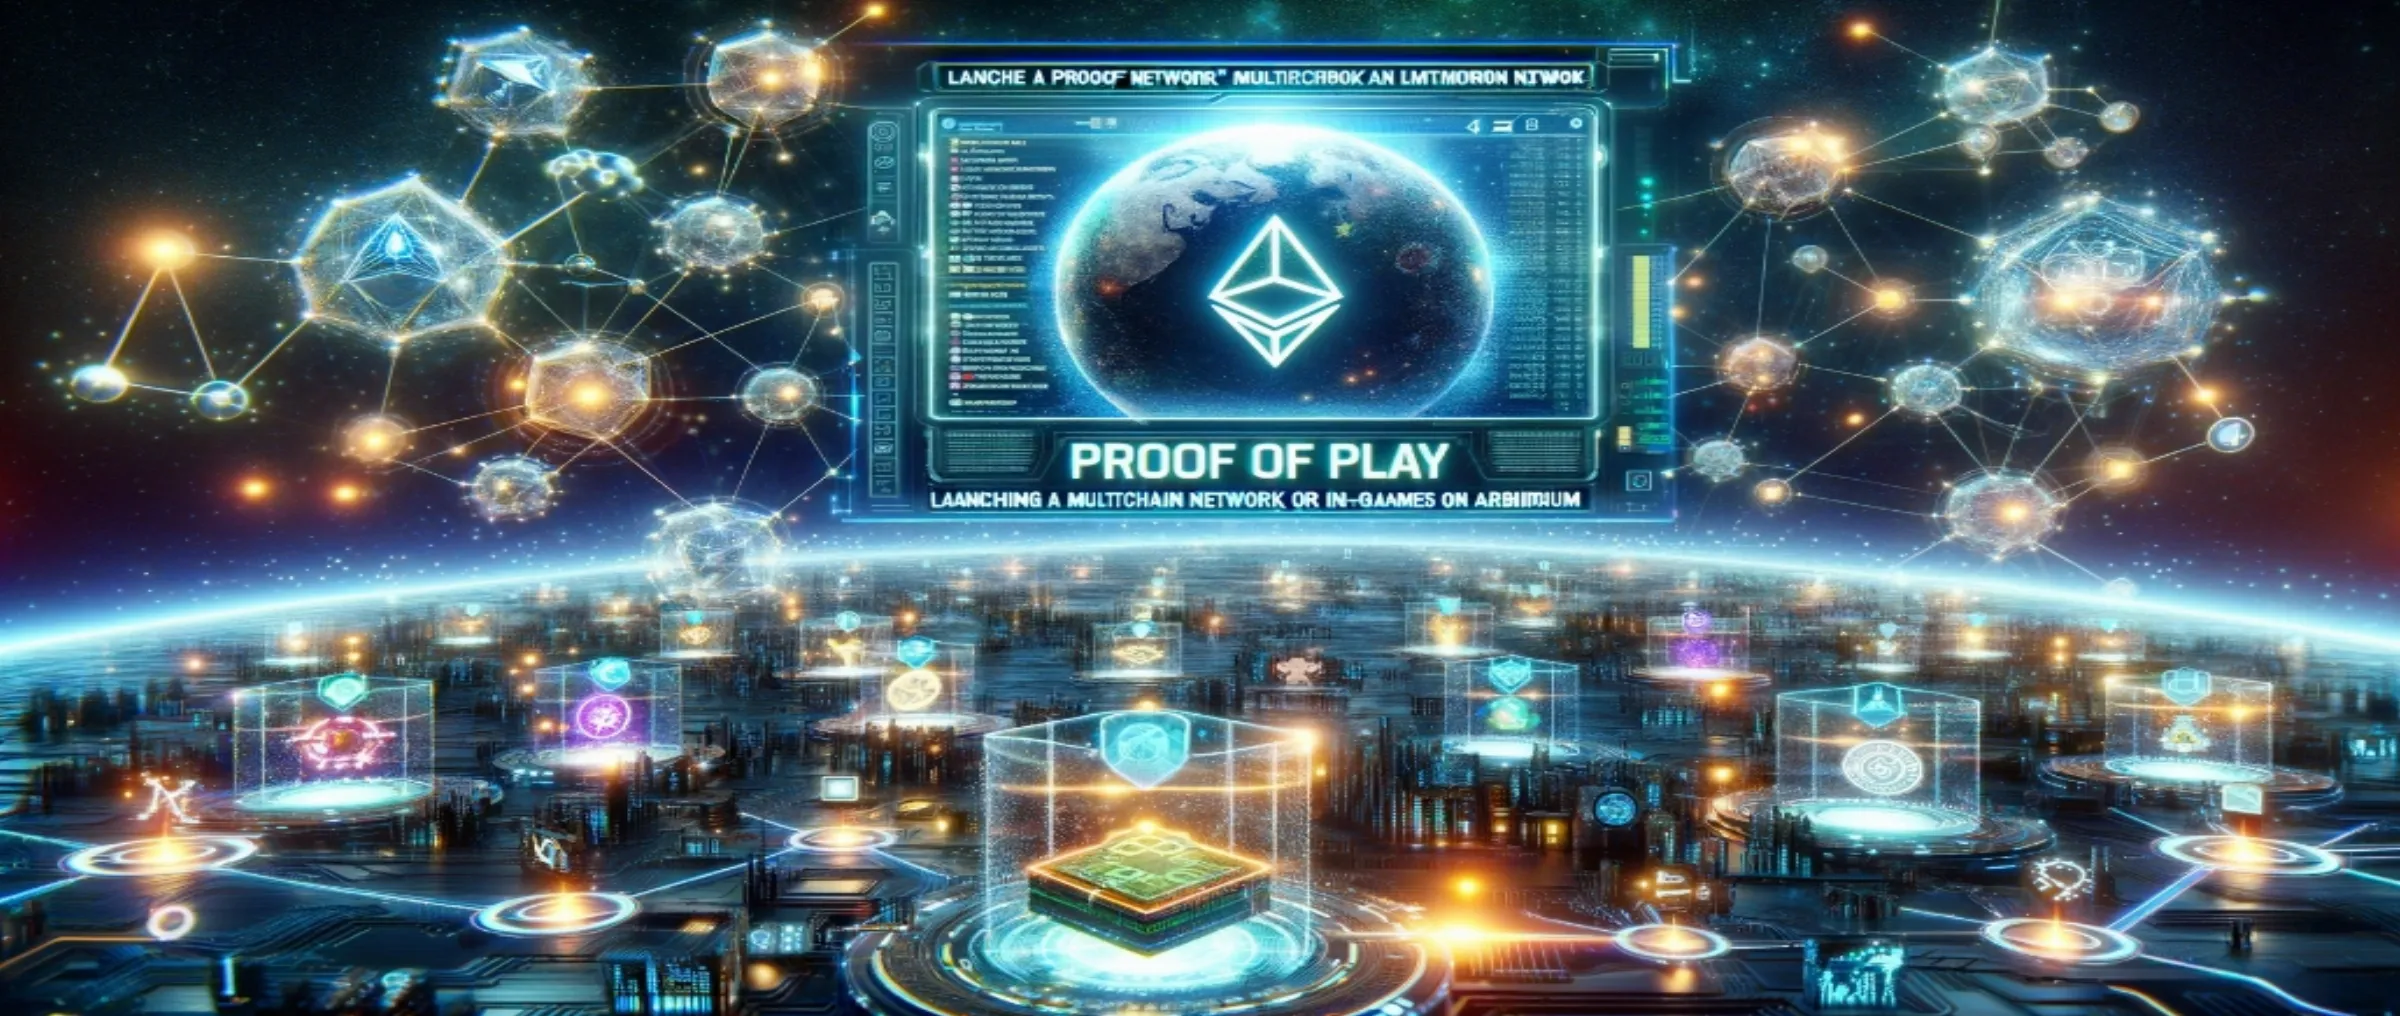 Proof of Play launches a multi-chain network for in-network games on Arbitrum